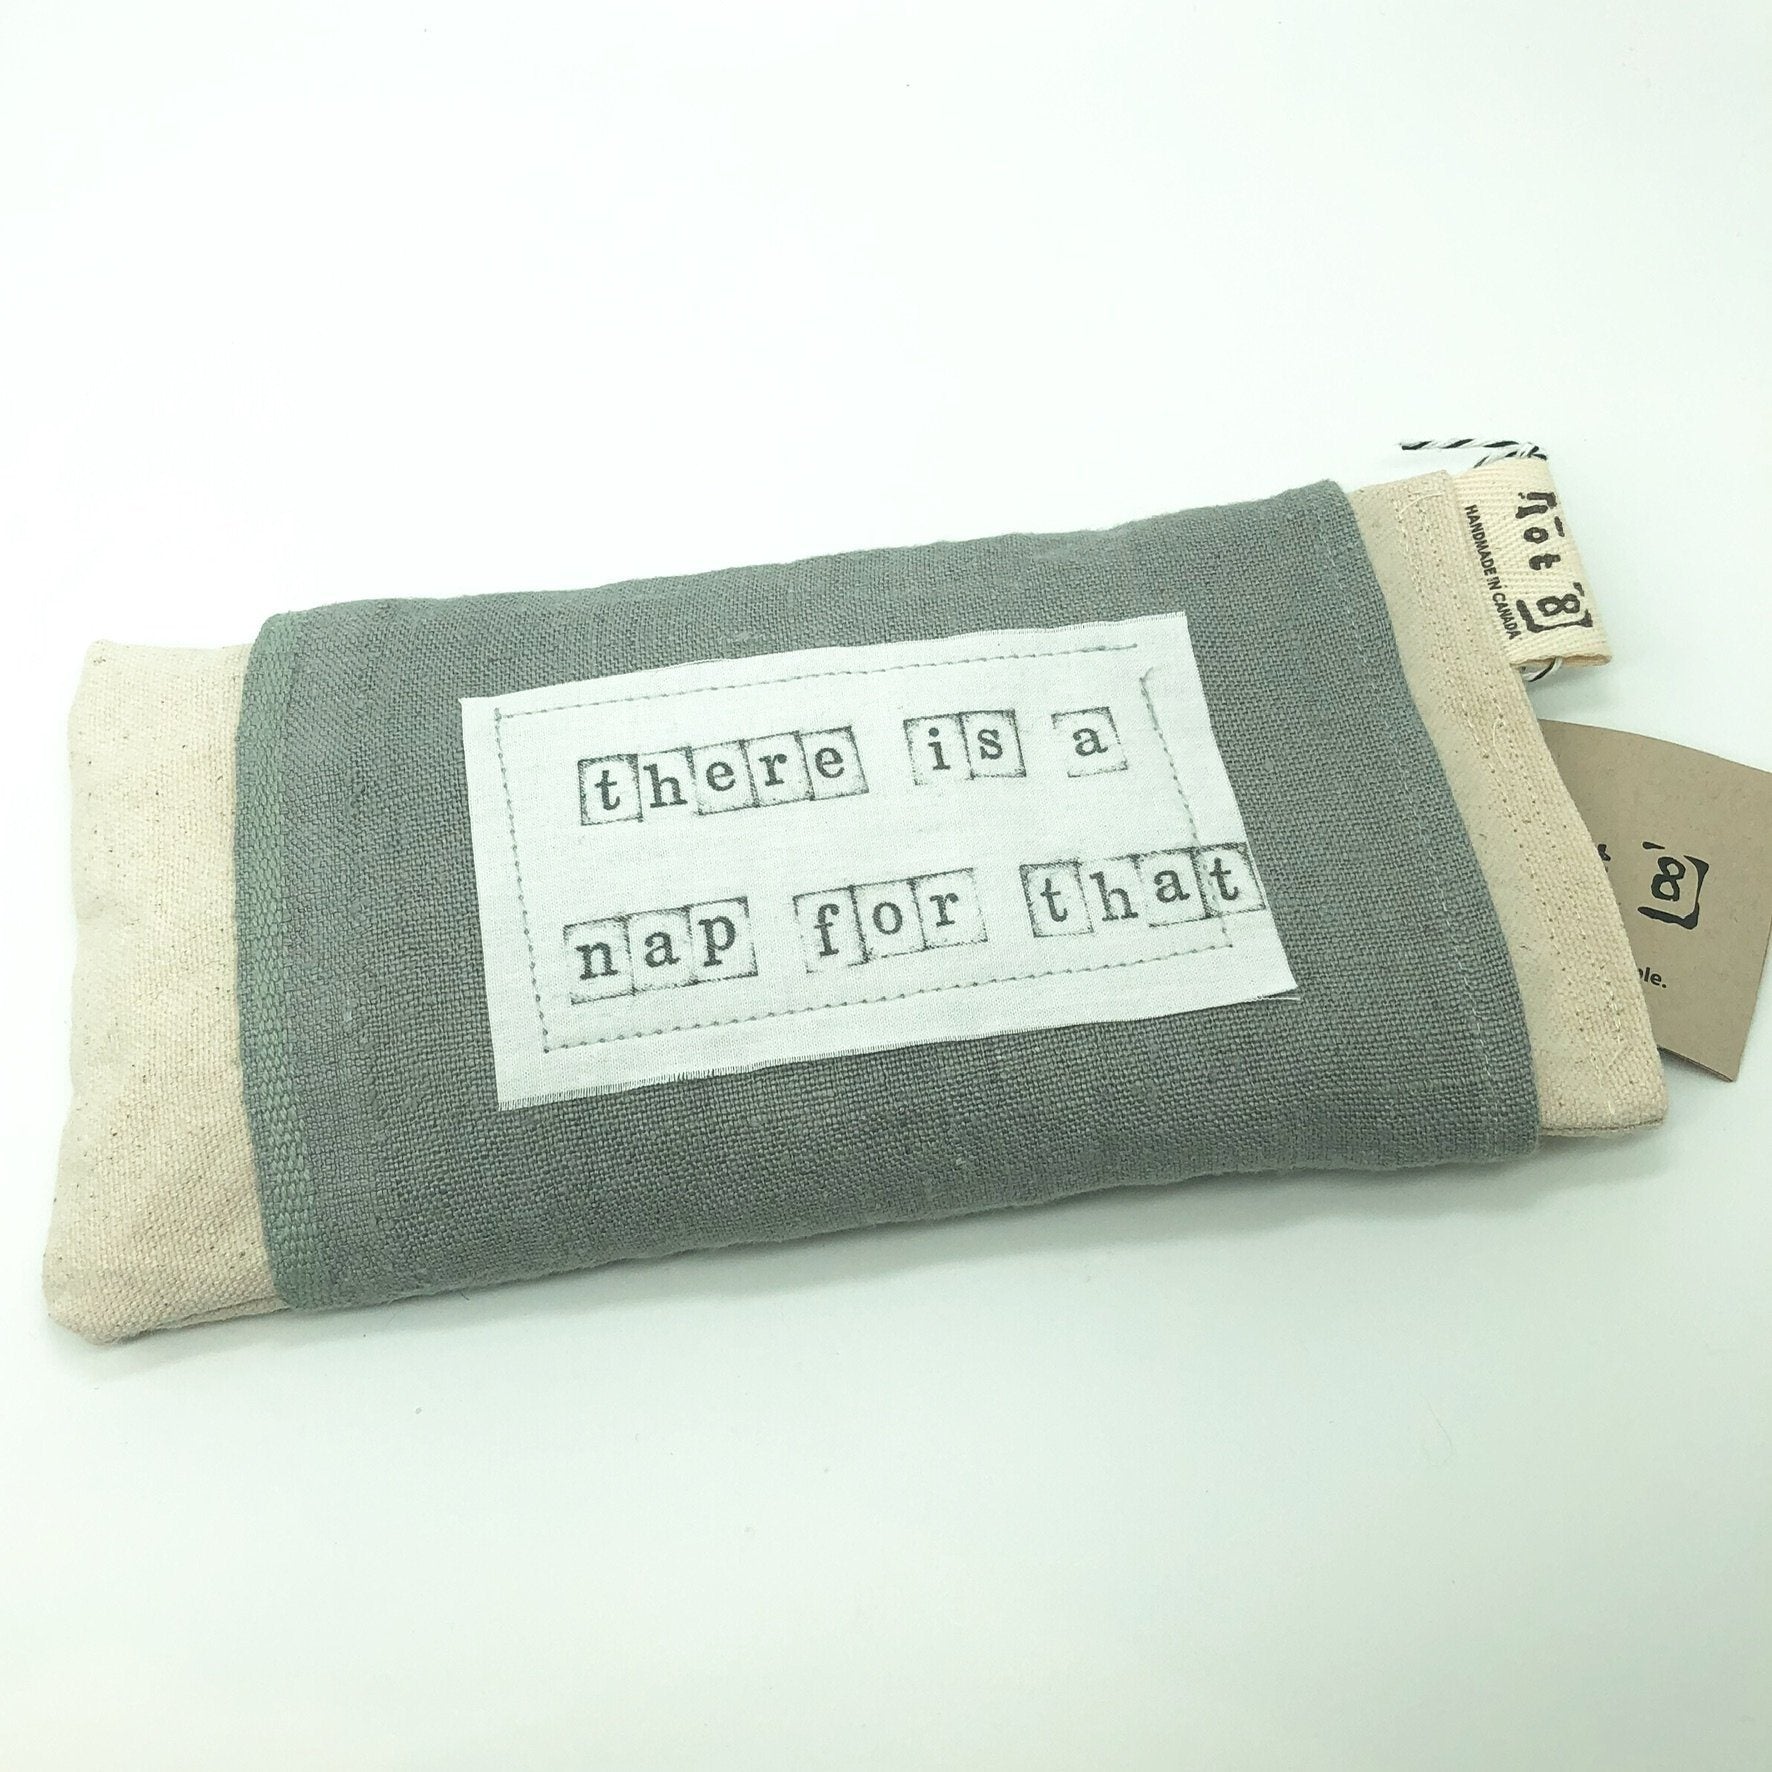 Linen Weighted Eye Pillow with flax and lavender Wellness Lot8 There's a nap for that Prettycleanshop